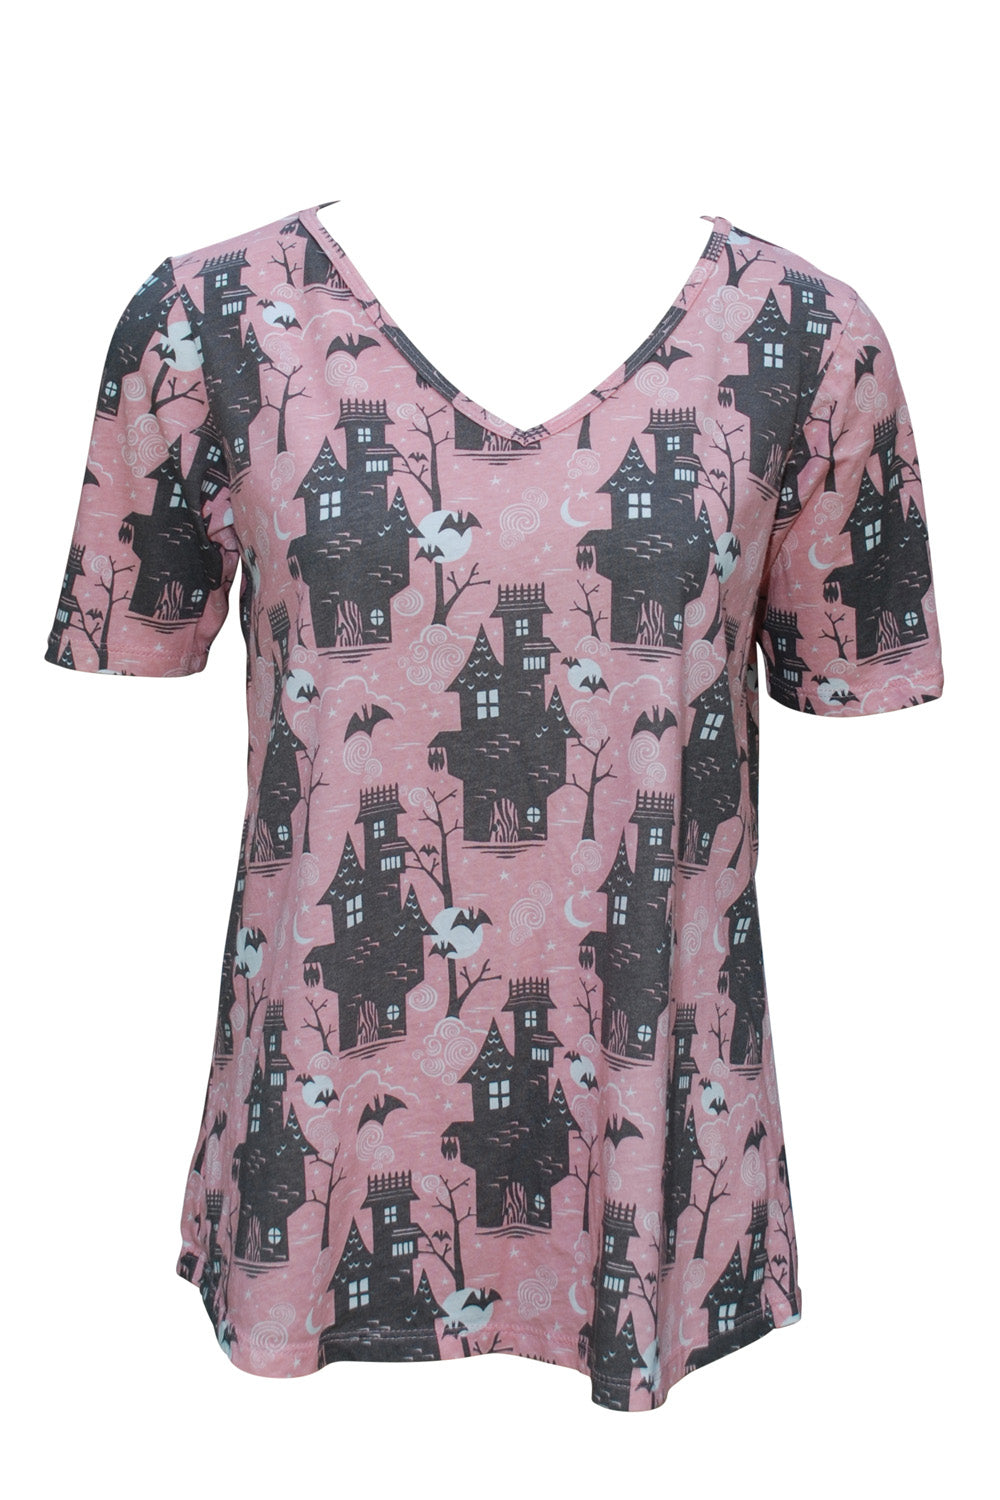 Light pink and grey spooky haunted house print v-neck tee